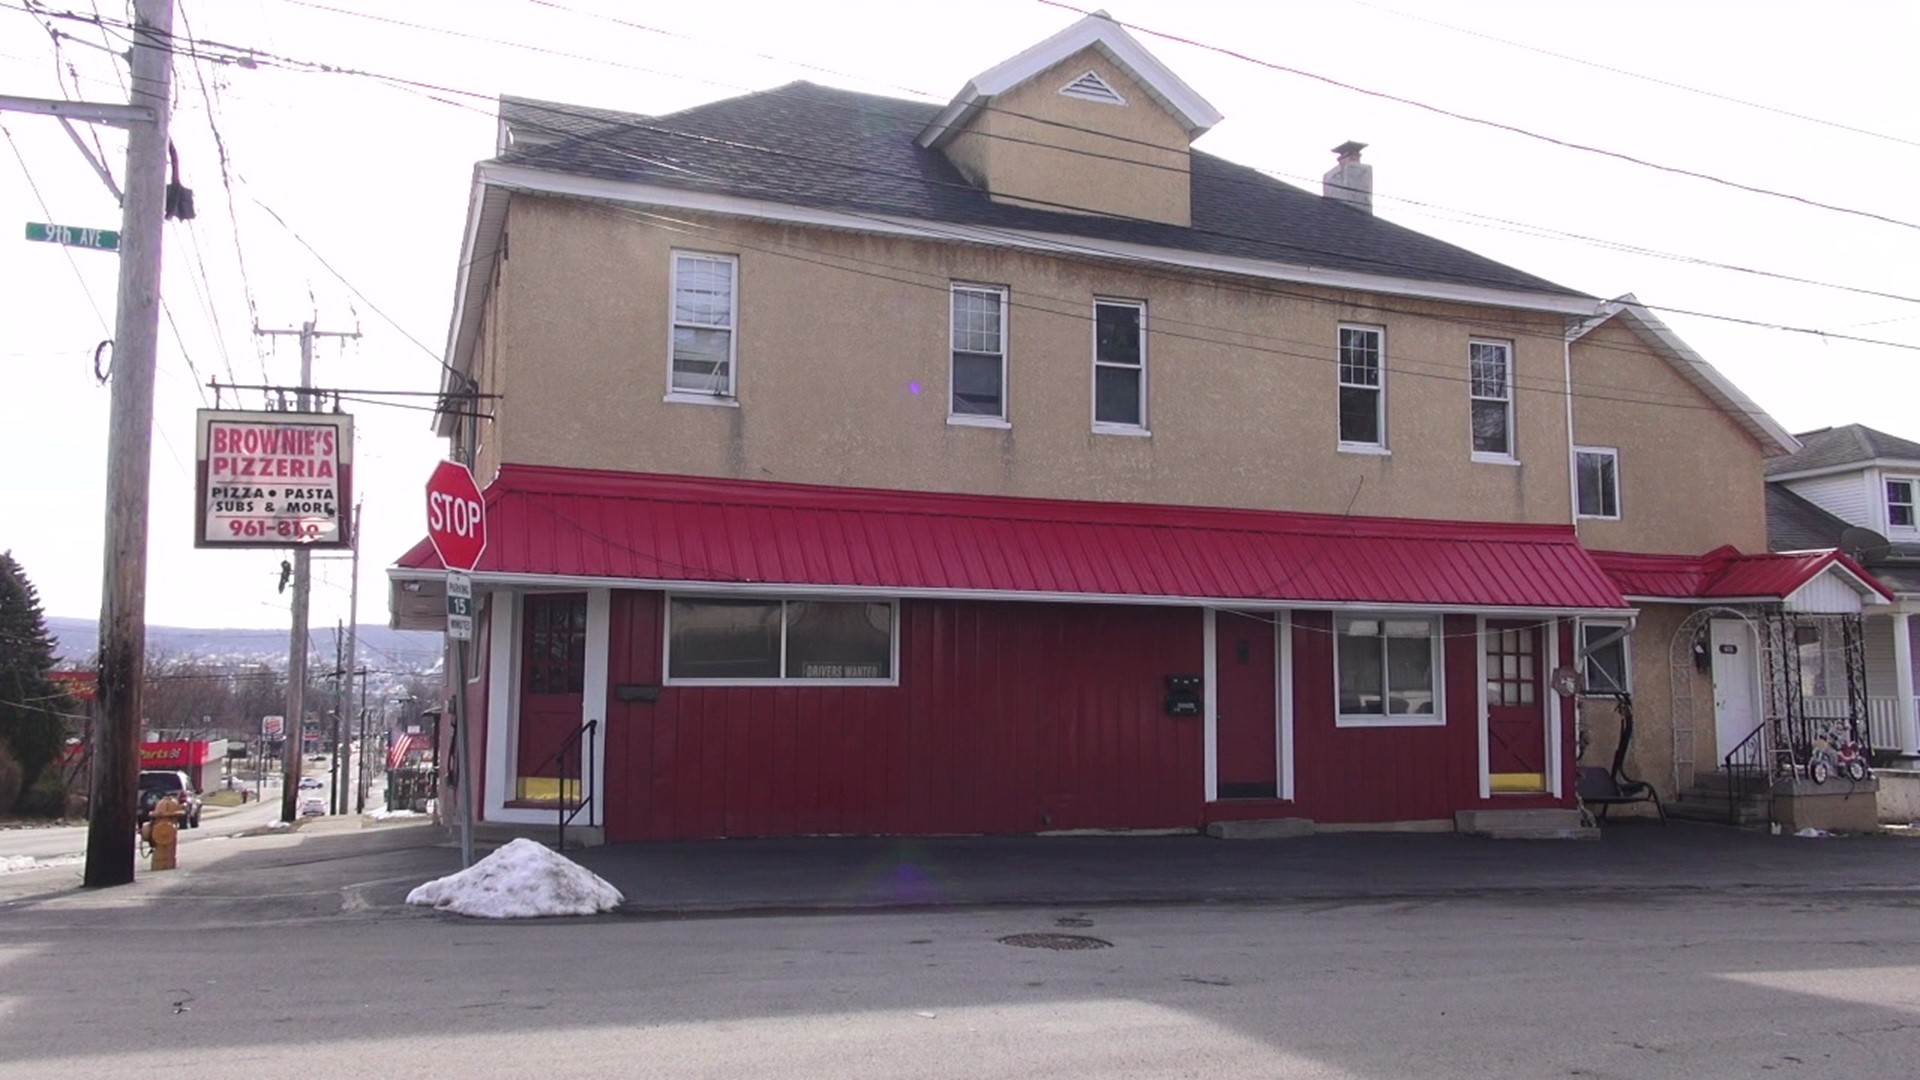 The doors of Brownie's Pizza have been closed for a couple months now and owner Bill Salerno made the tough decision to put the landmark business up for sale.